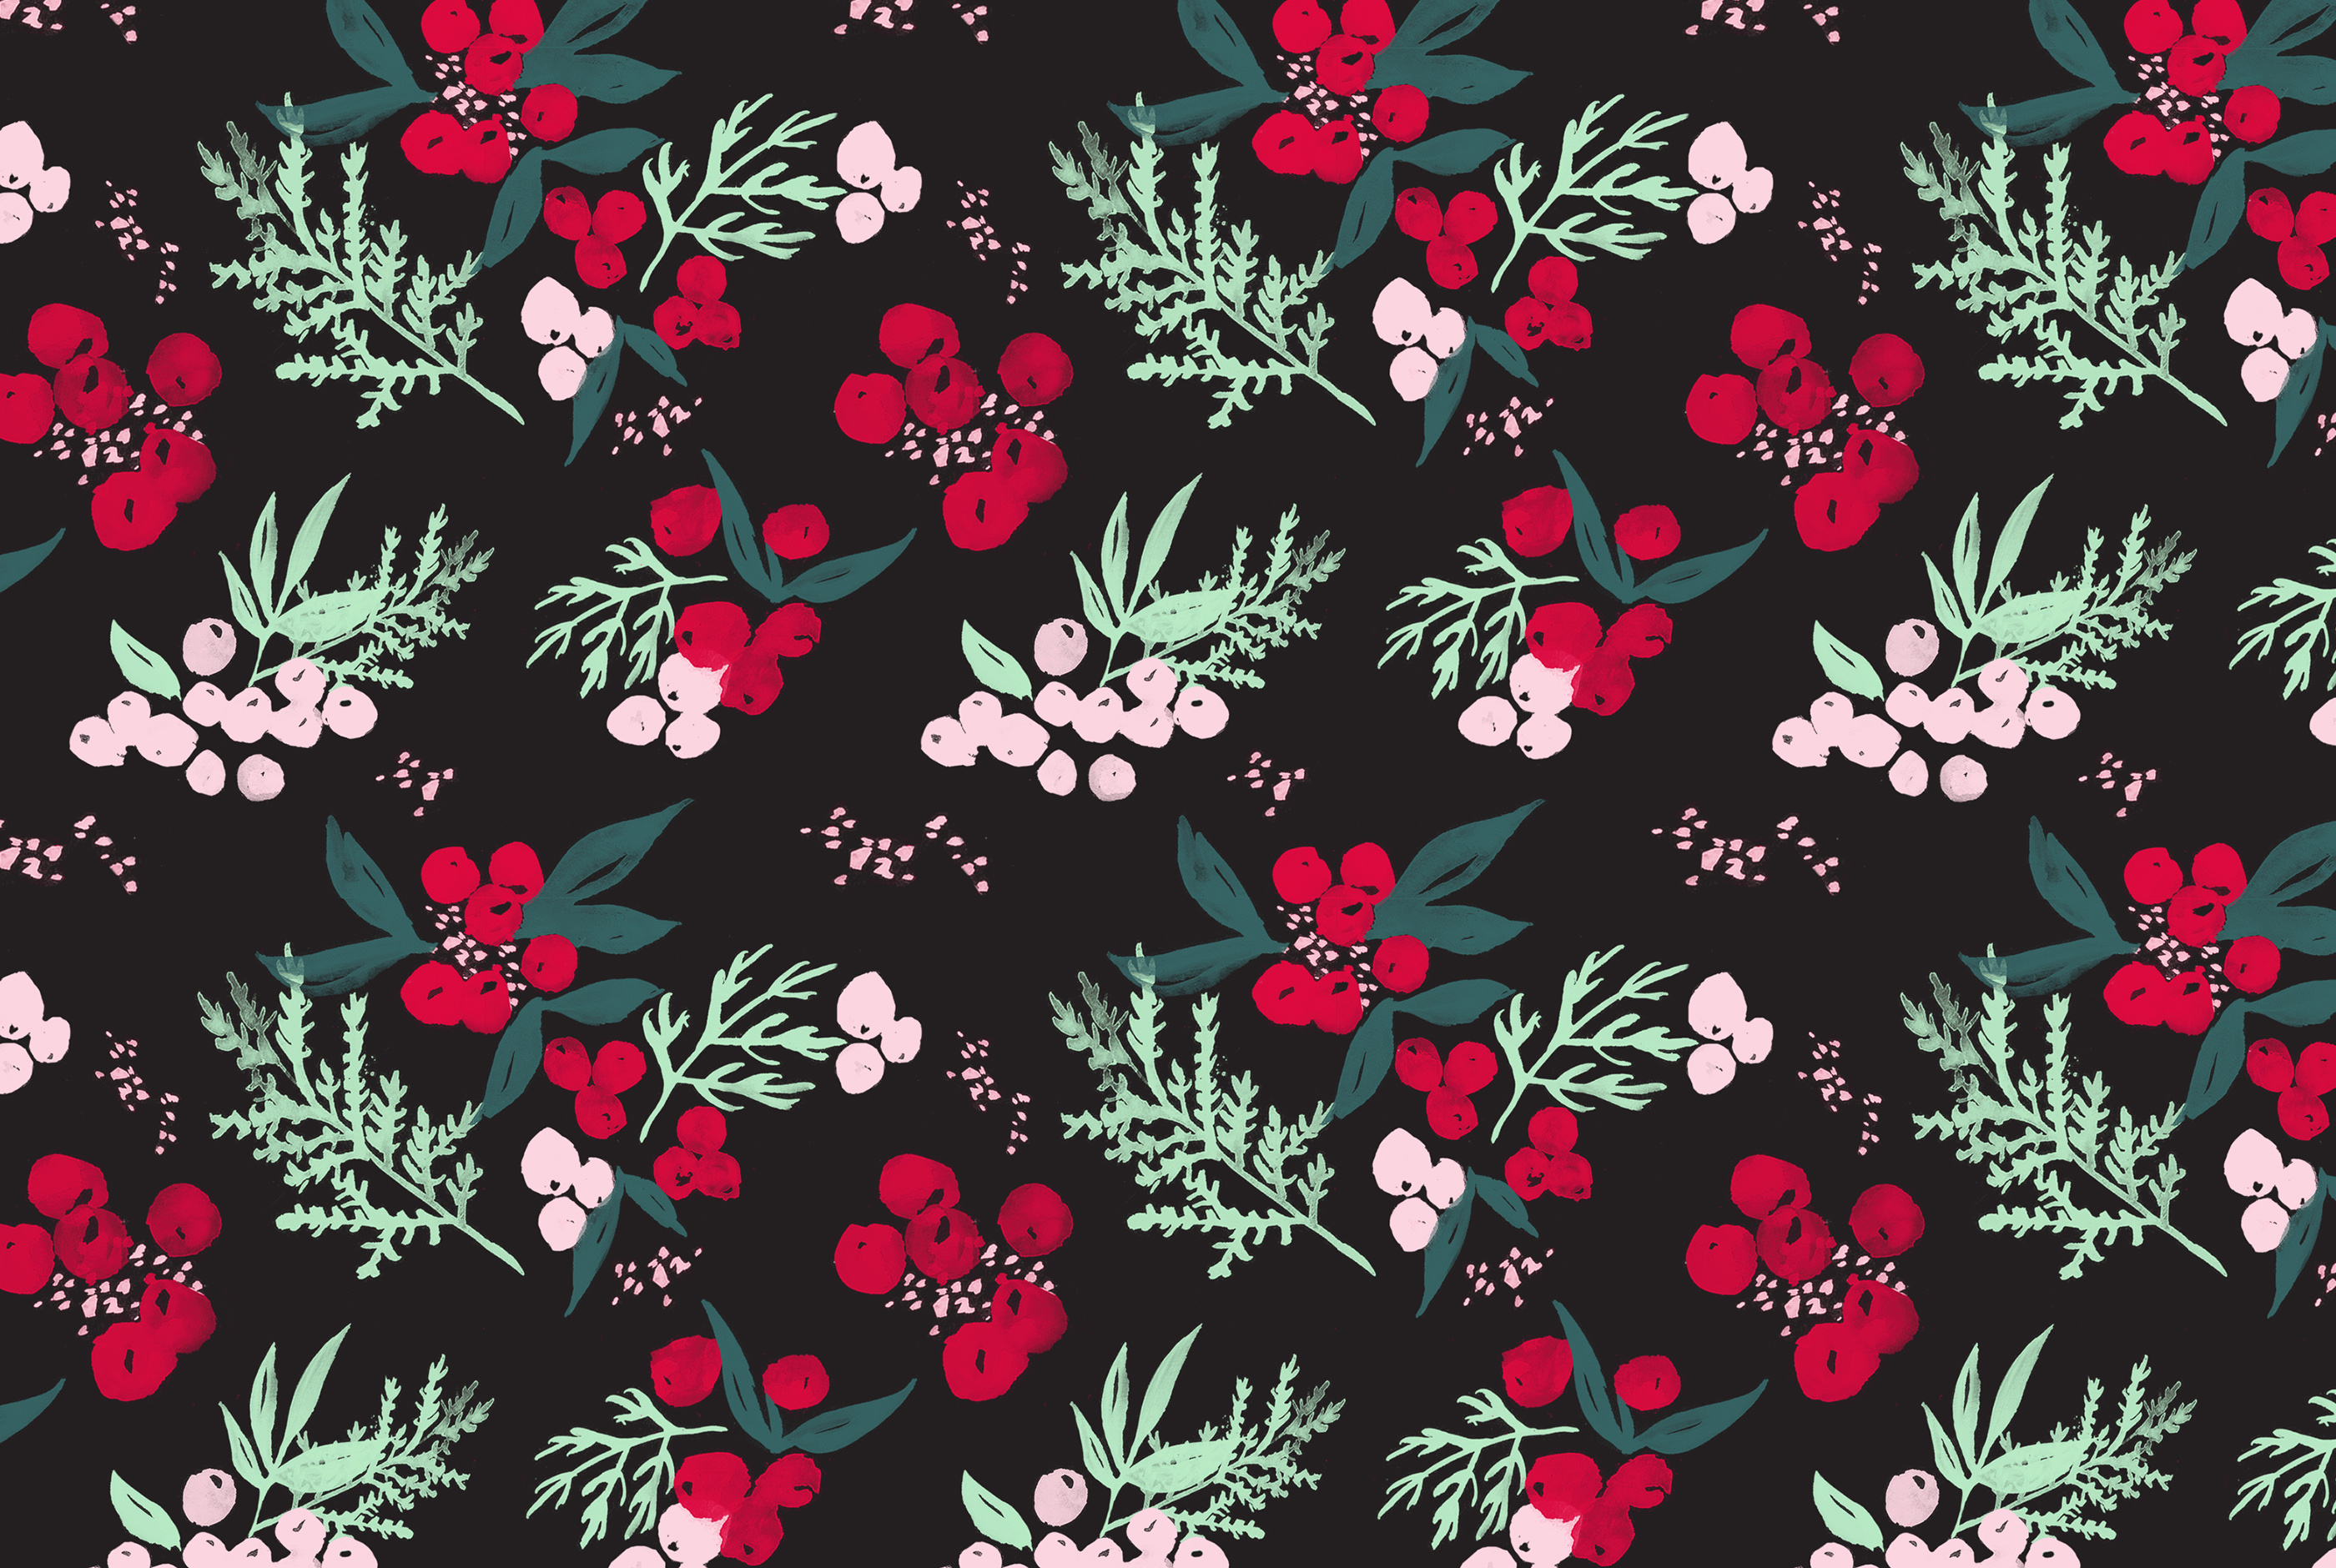 December Holiday Floral And Lettering Wallpaper